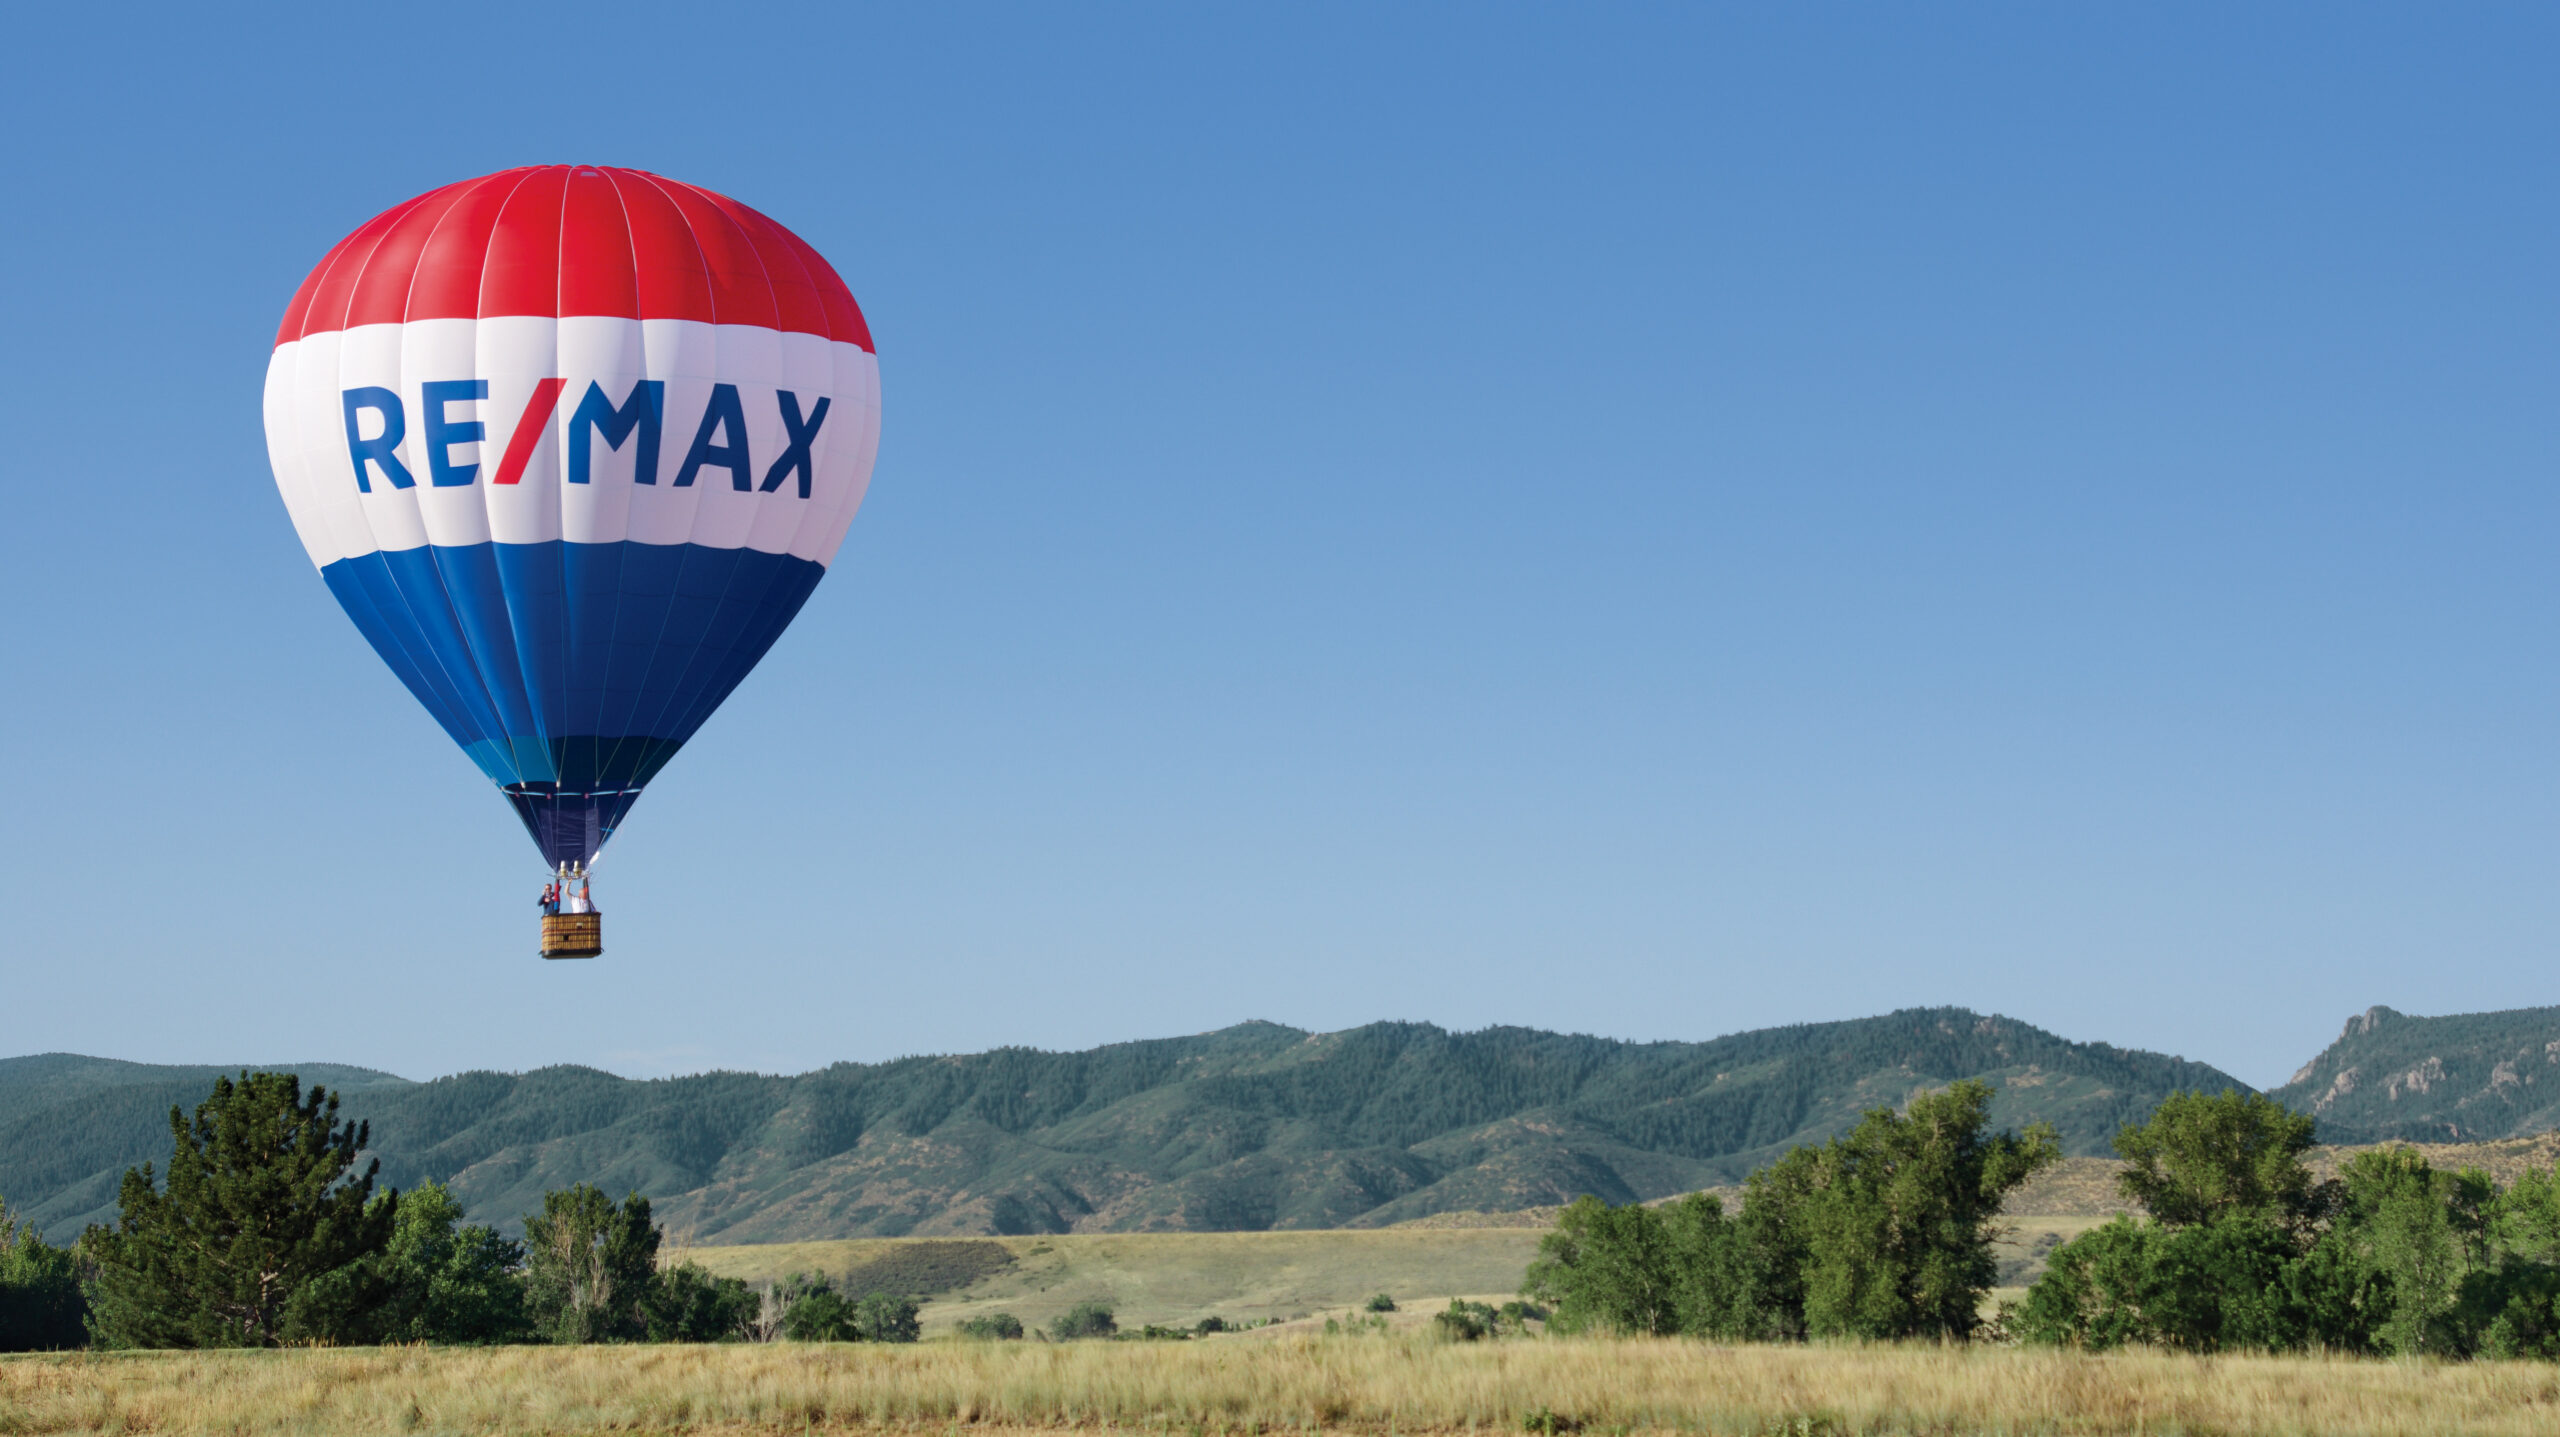 the remax name - remax ballon in the sky